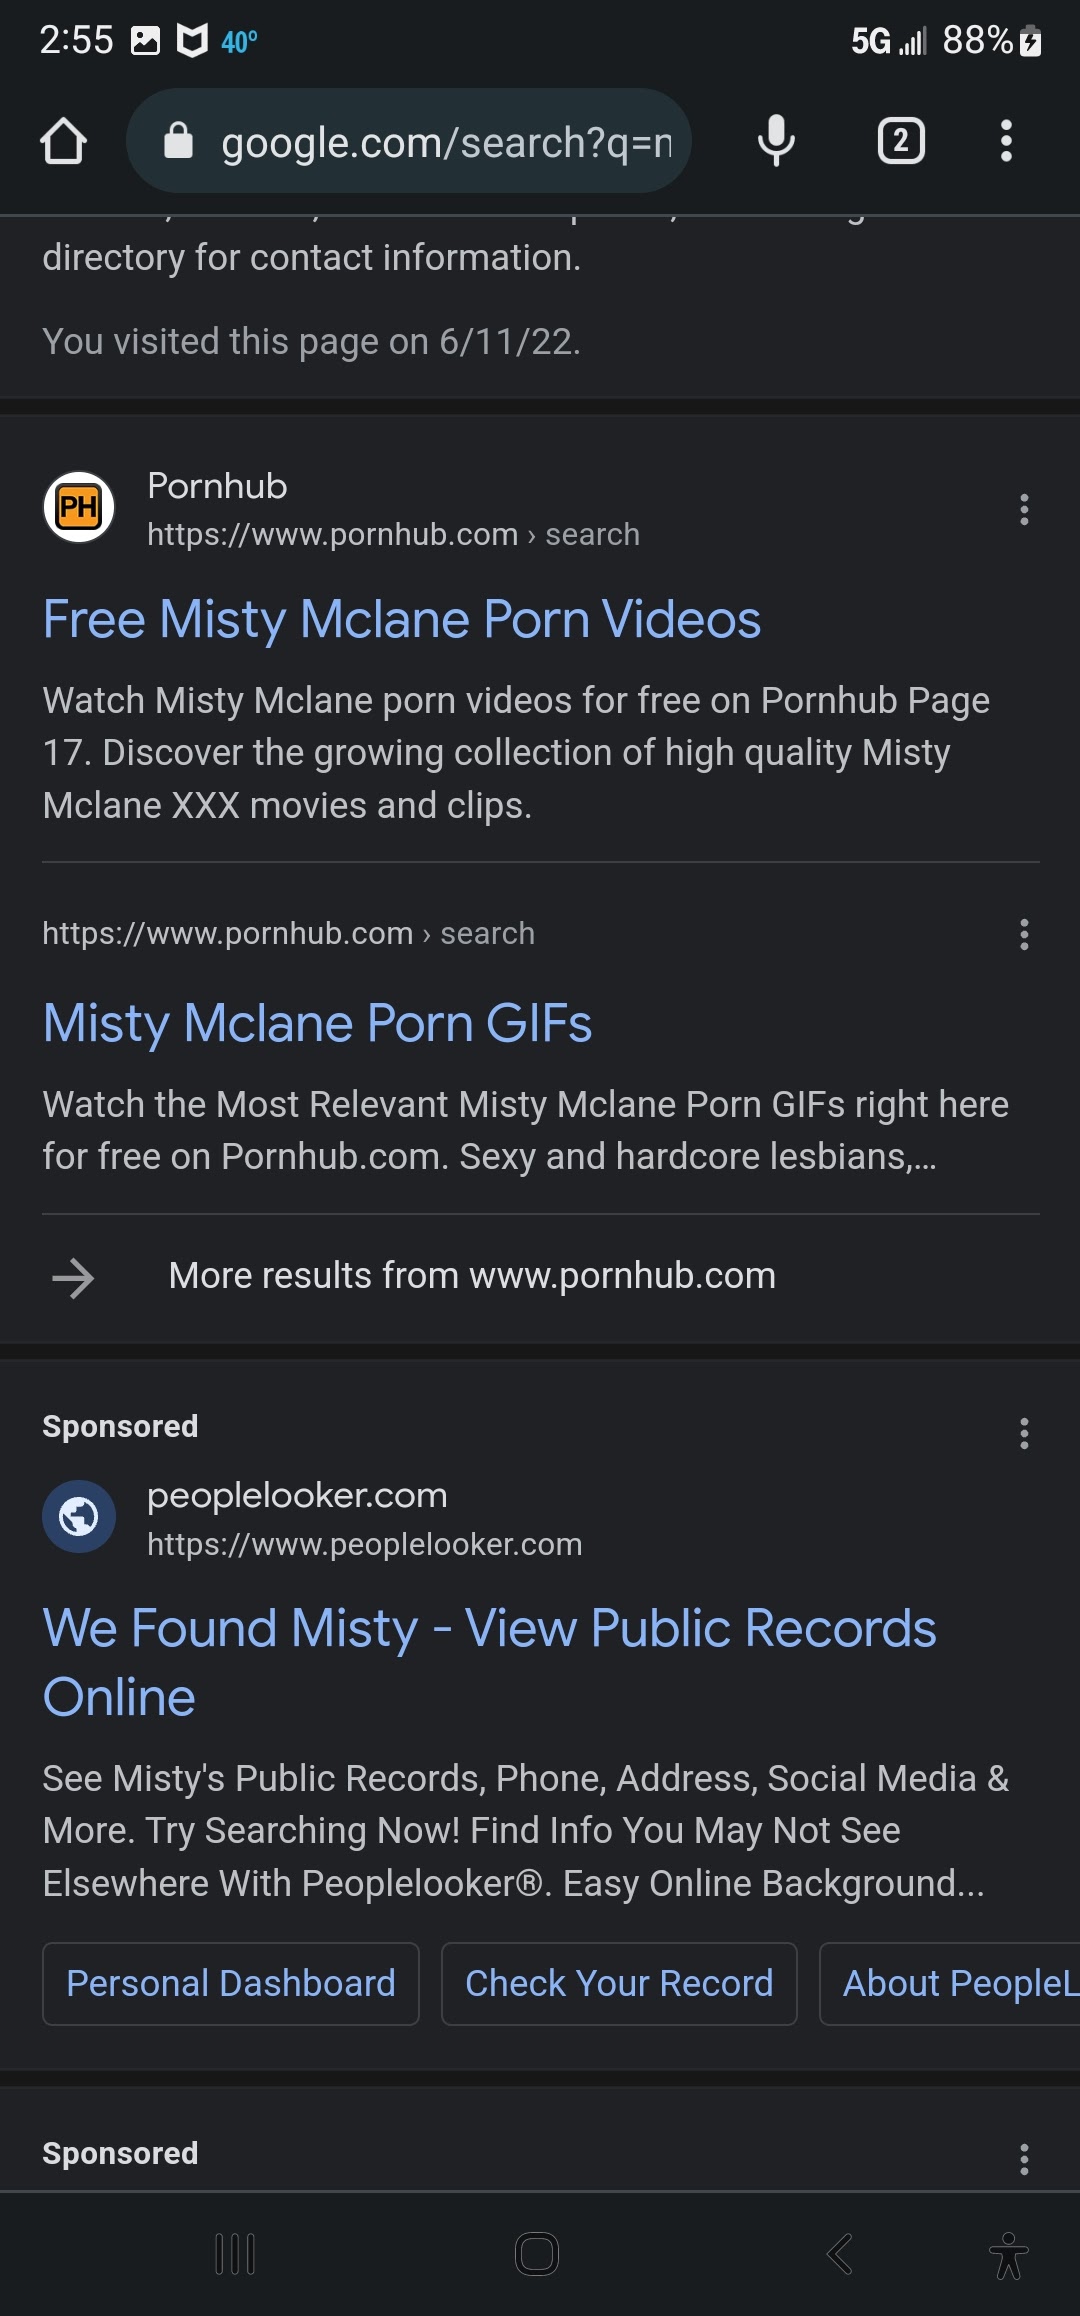 Xxx Sexy Video Folder - My name pulls me up on porn sites that I'm not on - Google Search Community